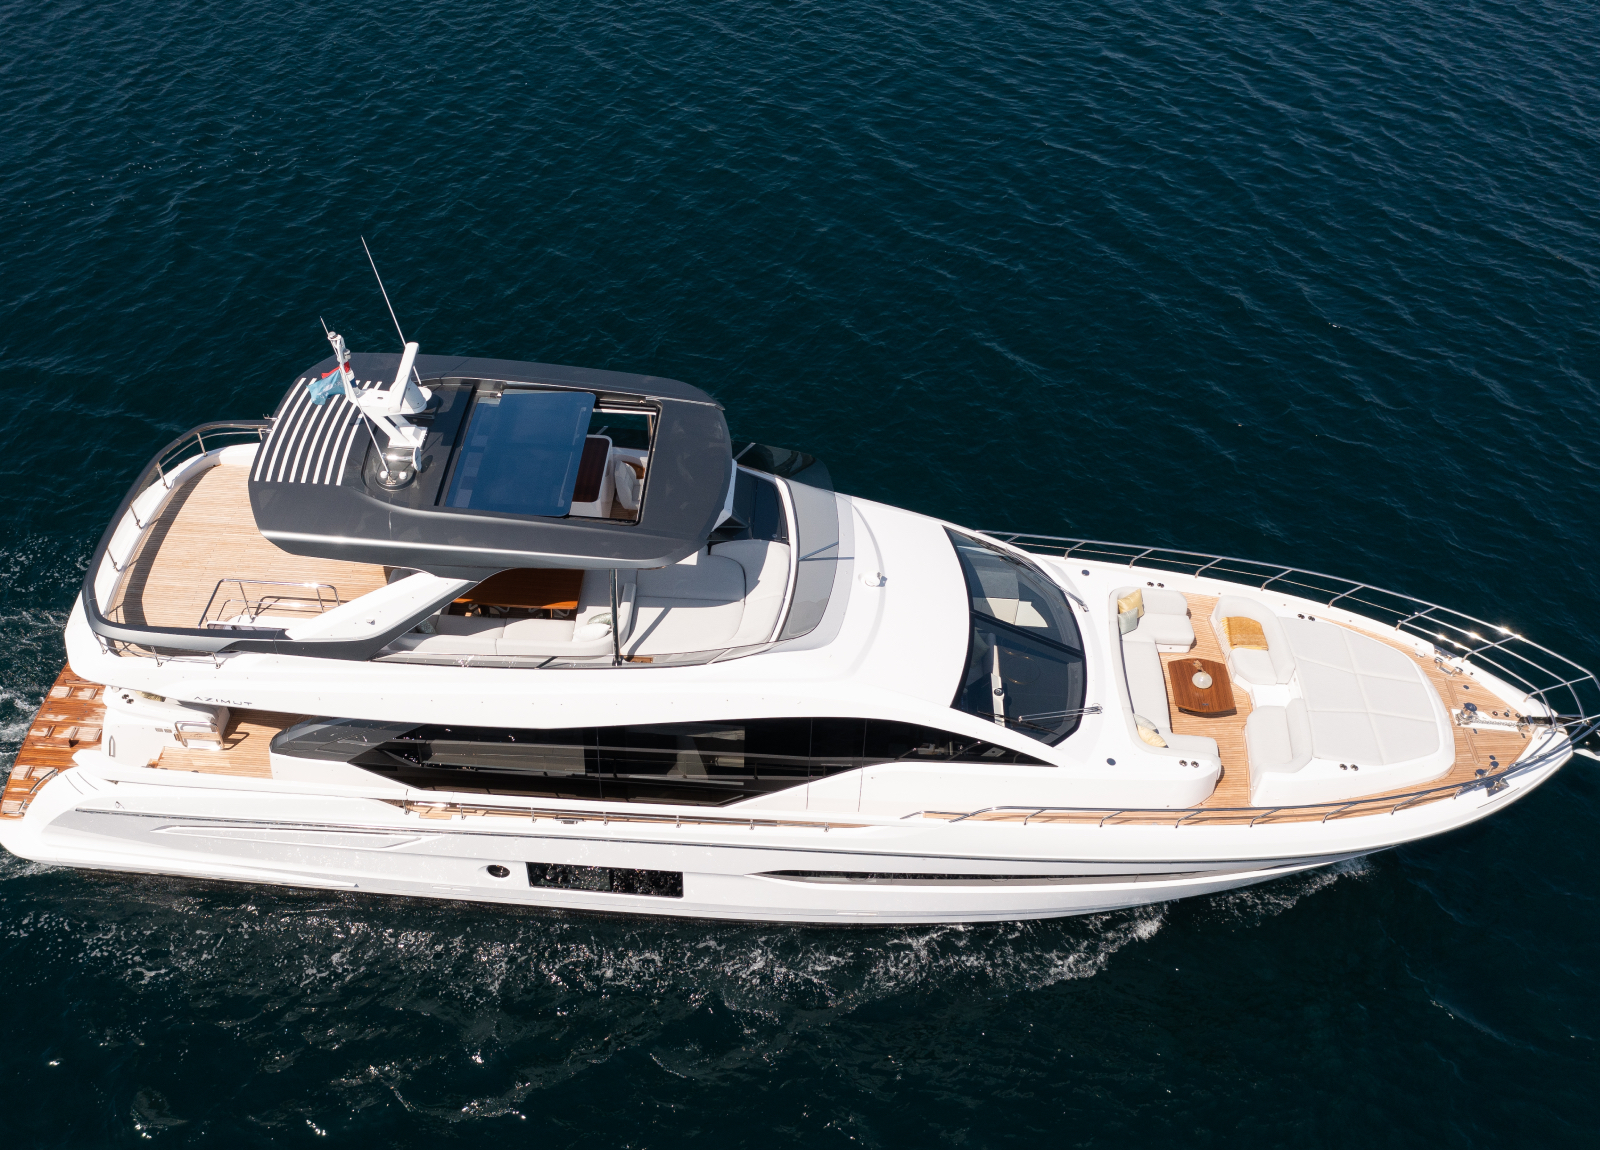 charter yacht azimut 78 fly prewi aeral view